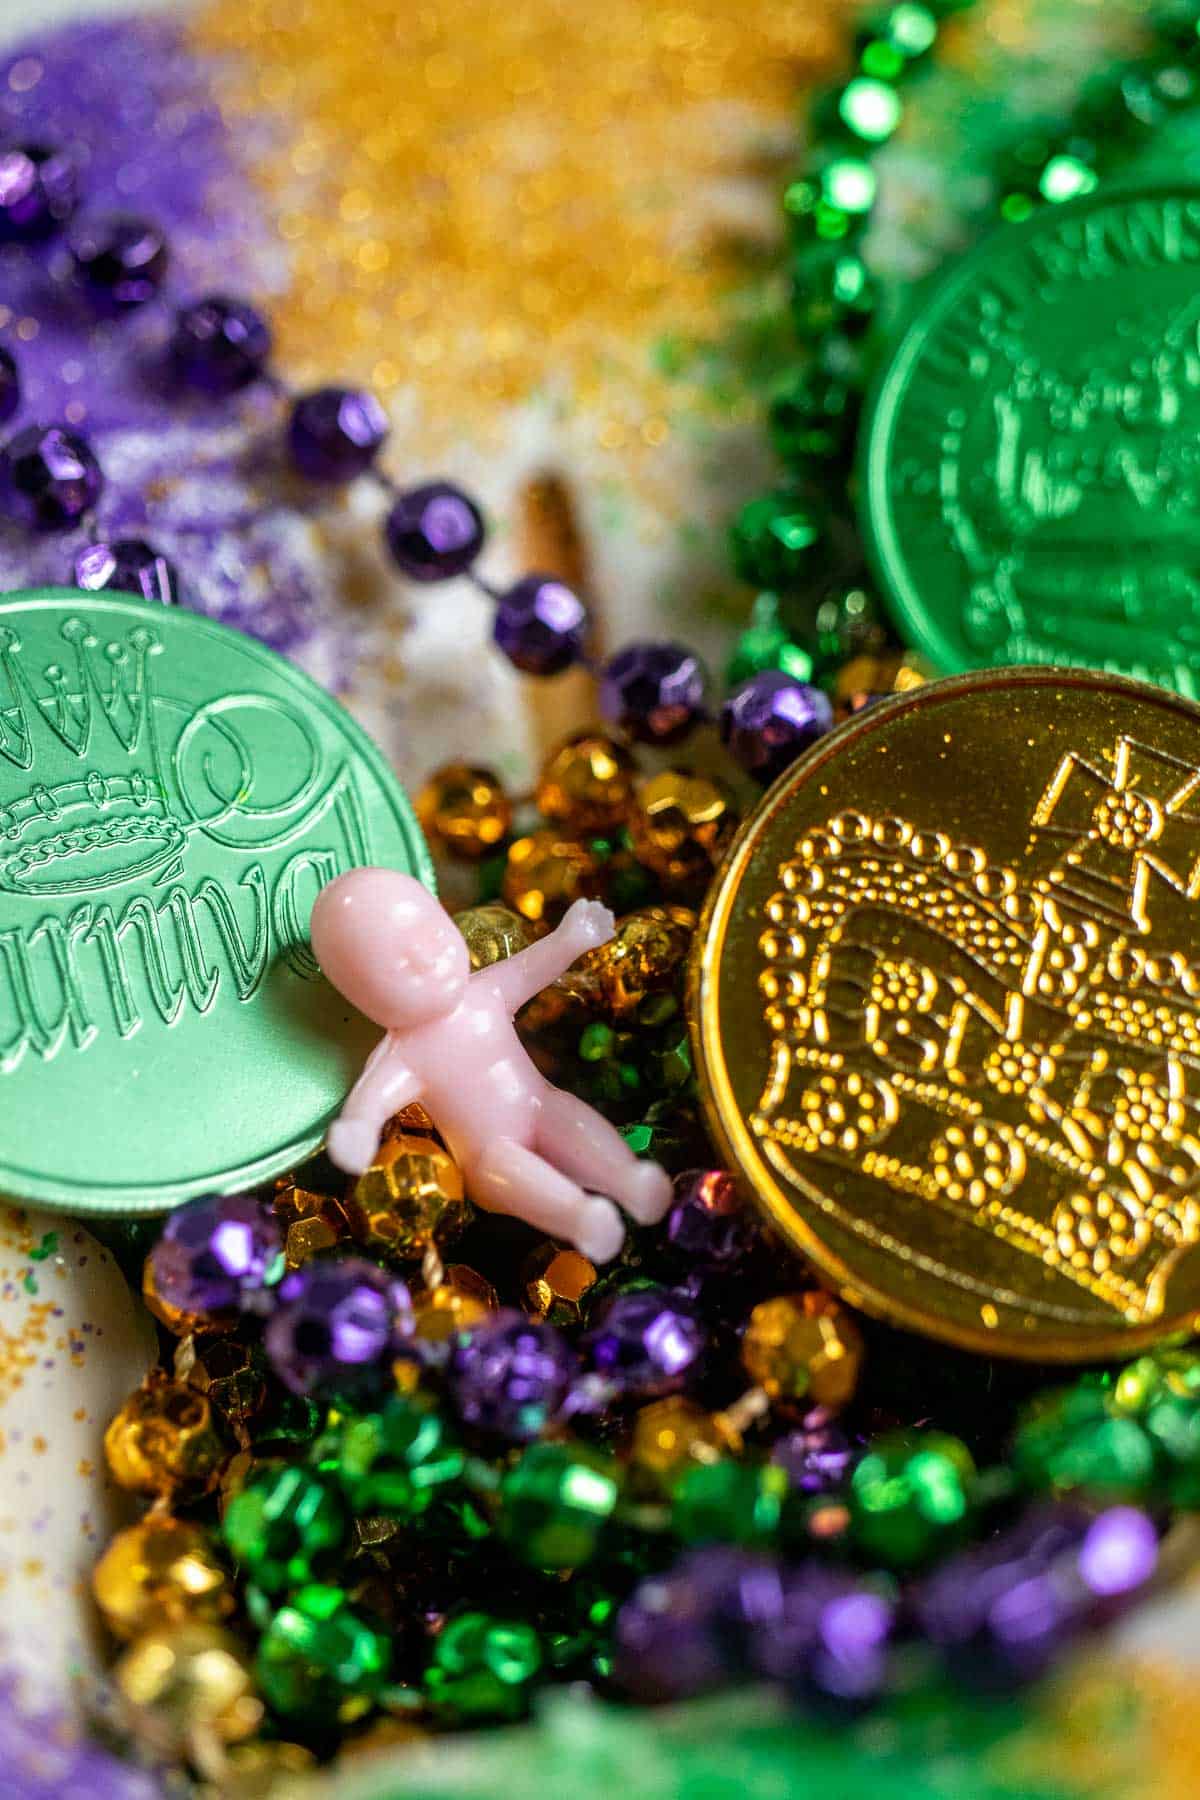 Close up view of the baby on top of a Louisiana king cake, nestled between Mardi Gras beads and coins.